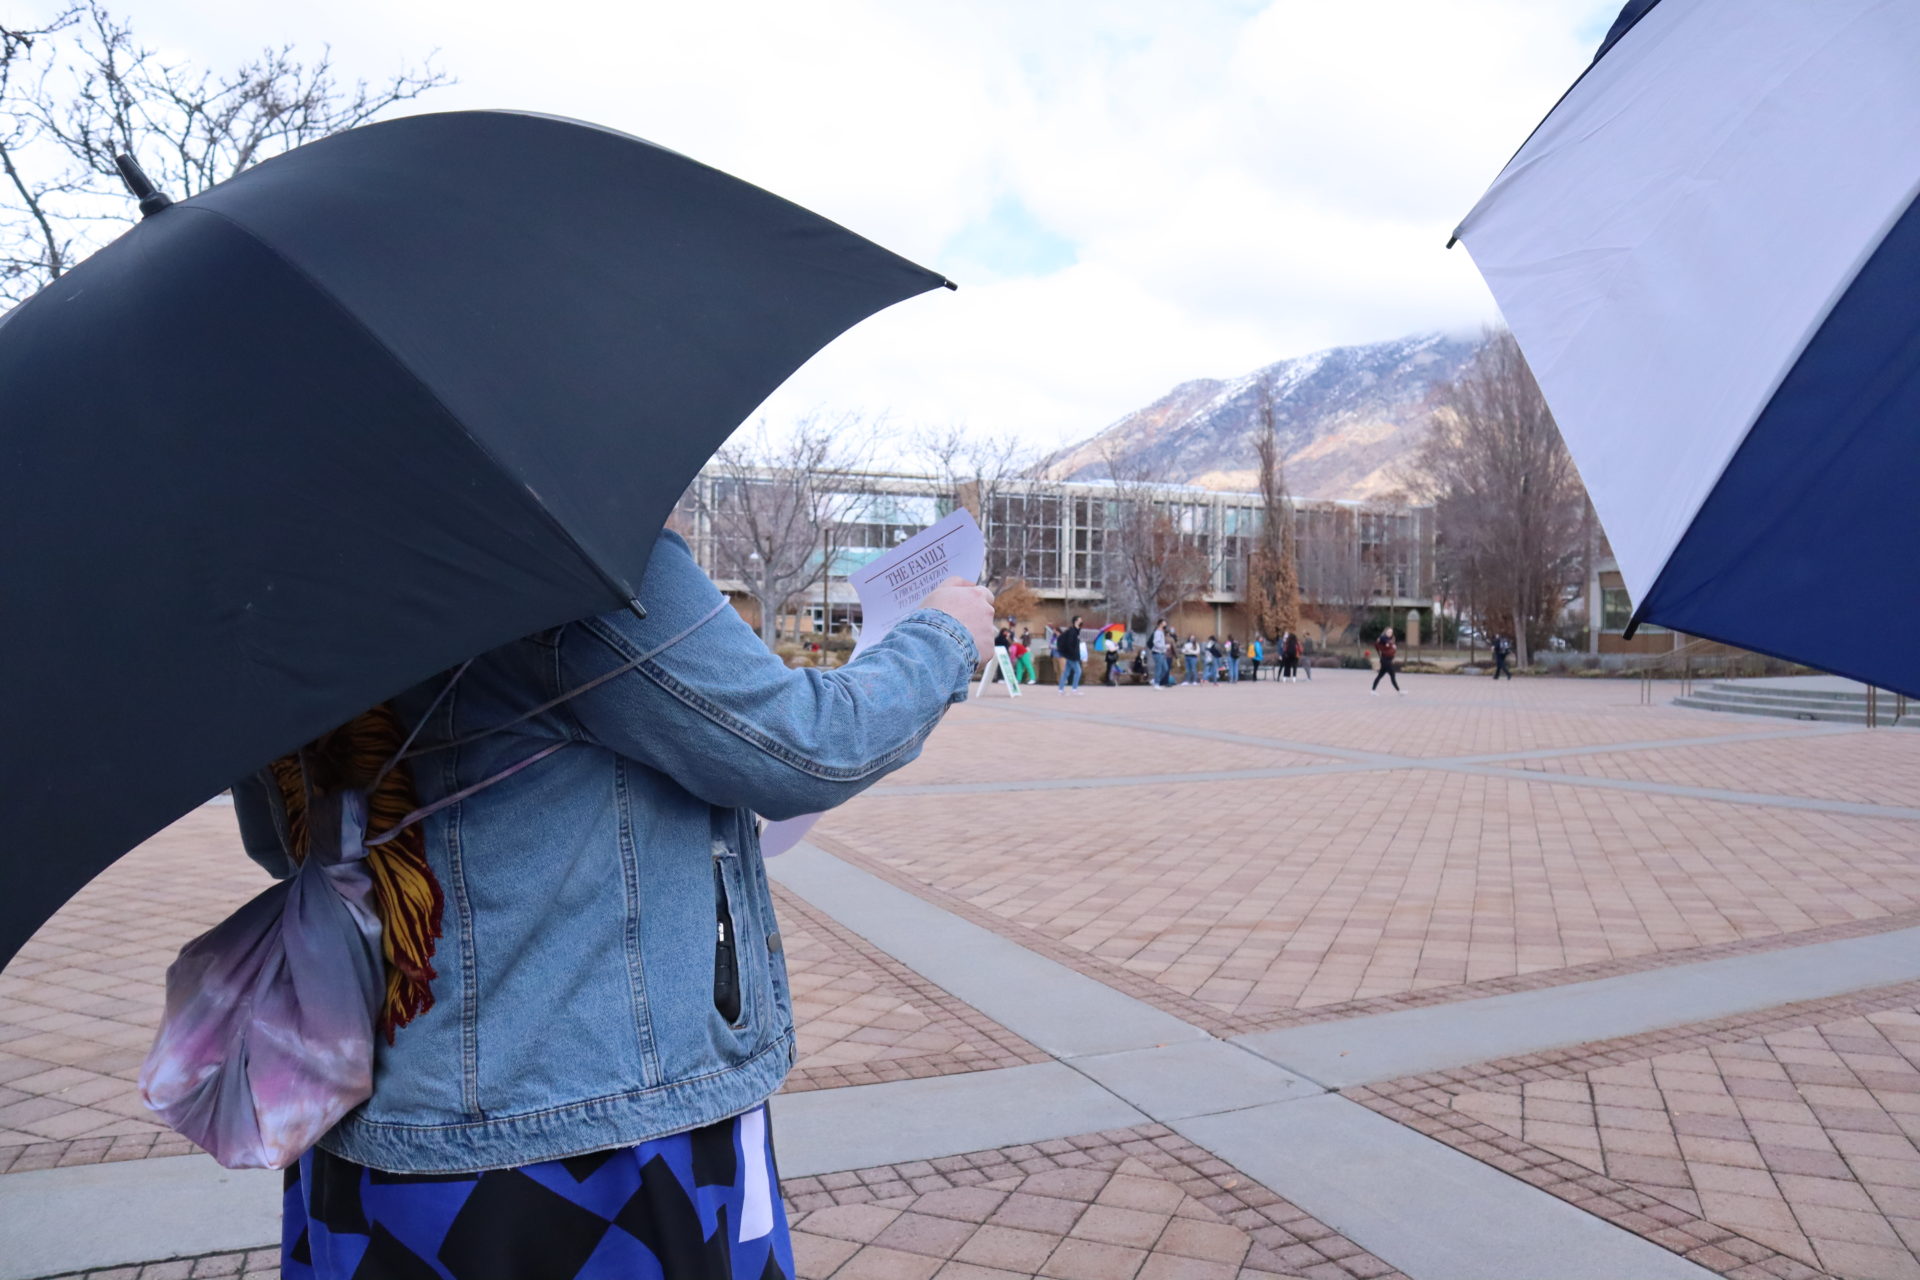 BYU 'Rainbow Day' participants show support for LGBT community while